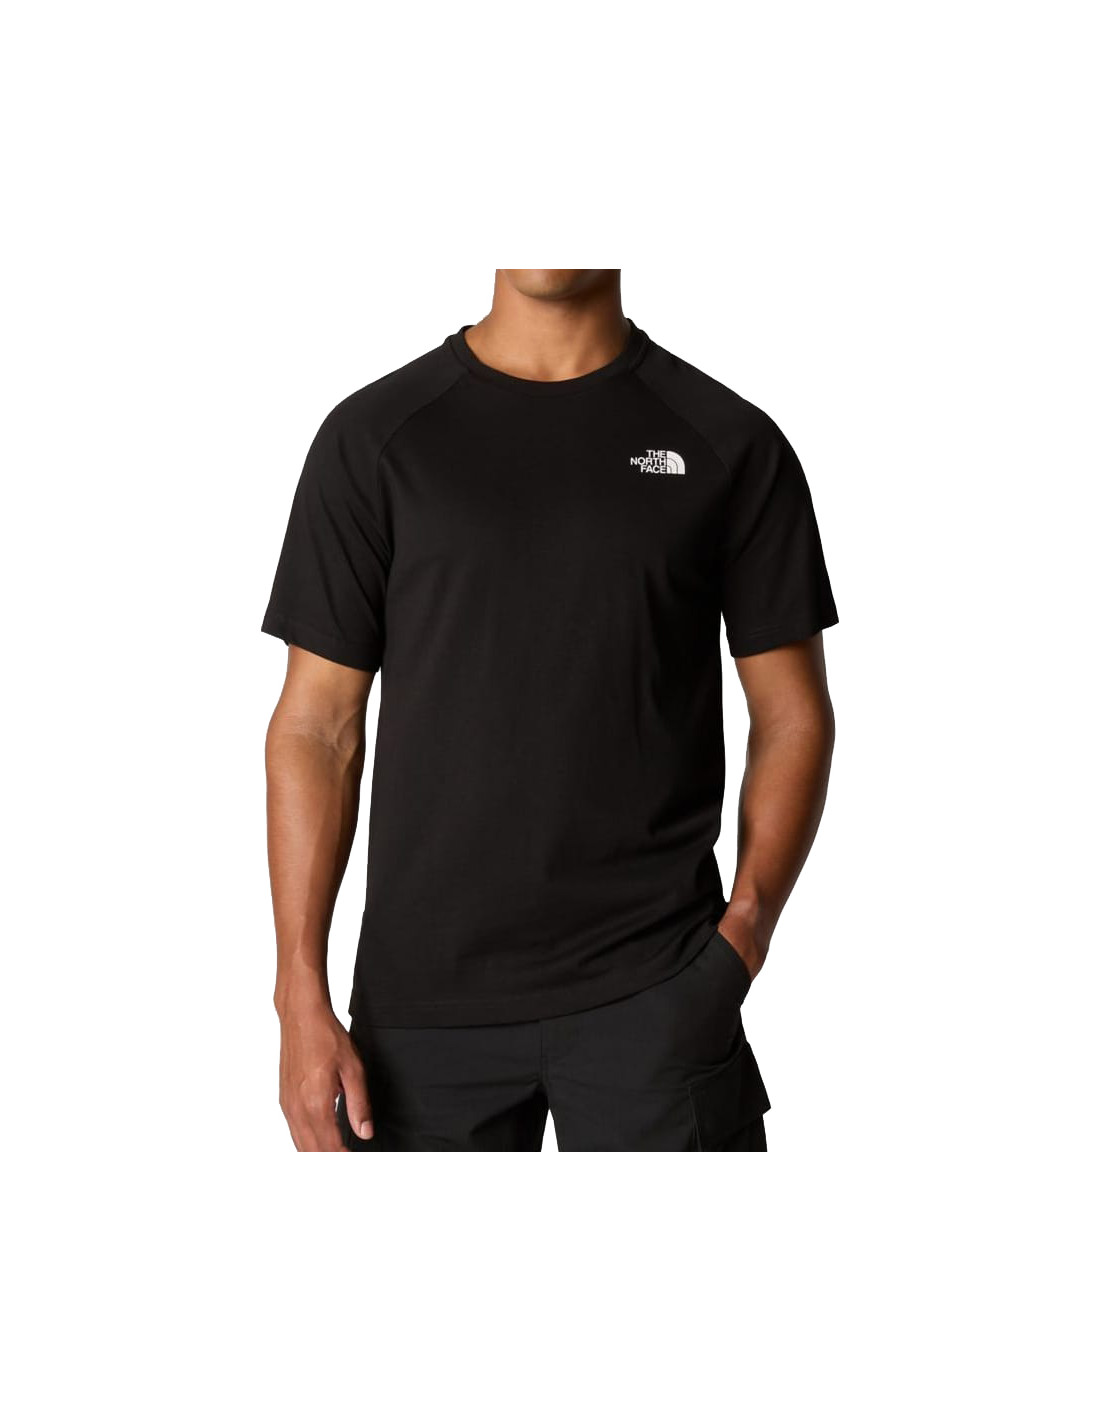 M S S NORTH FACES TEE